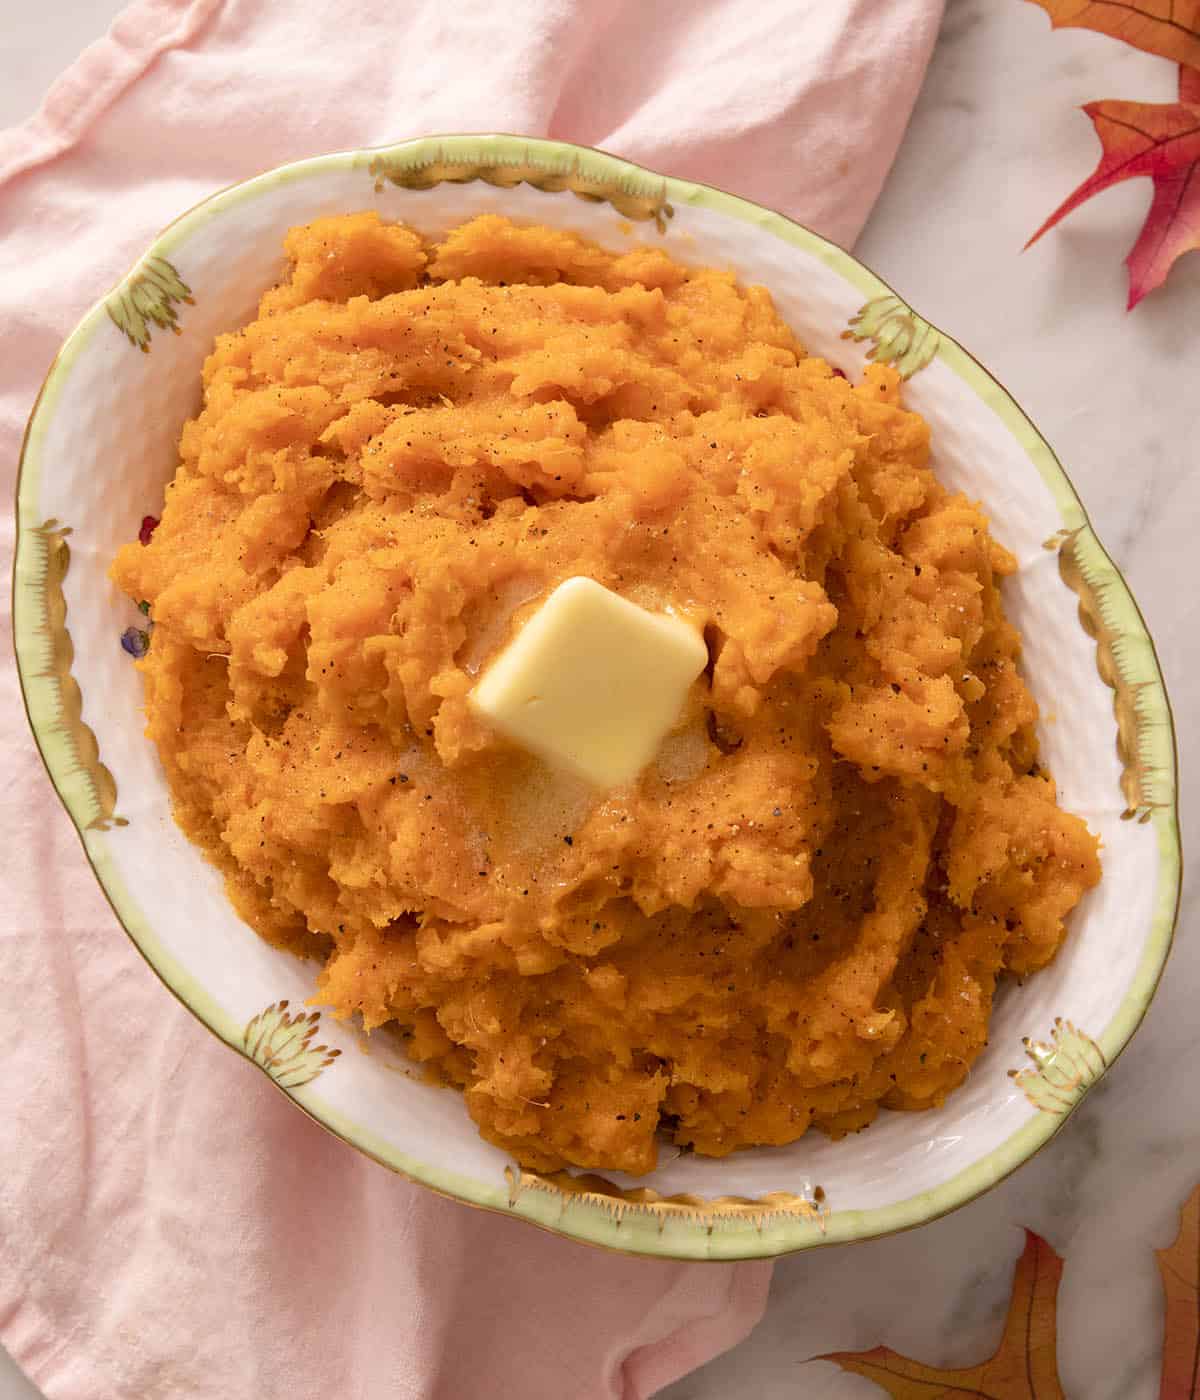 Mashed sweet potatoes in an oval bowl next to a pink linen napkin.